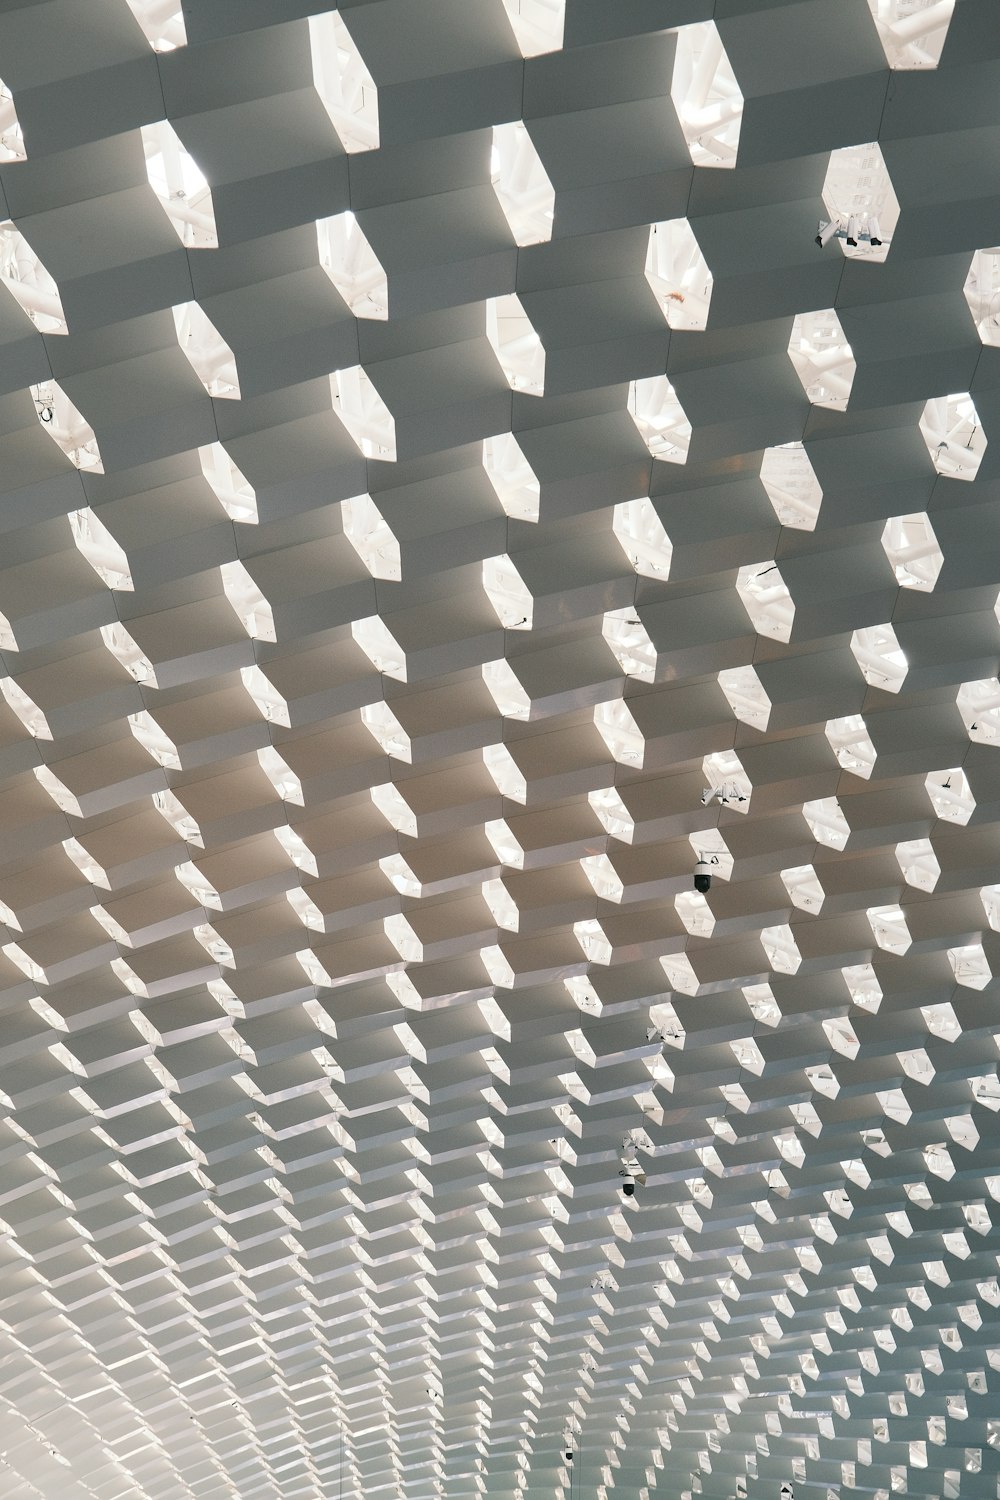 the ceiling of a train station is covered in white cubes